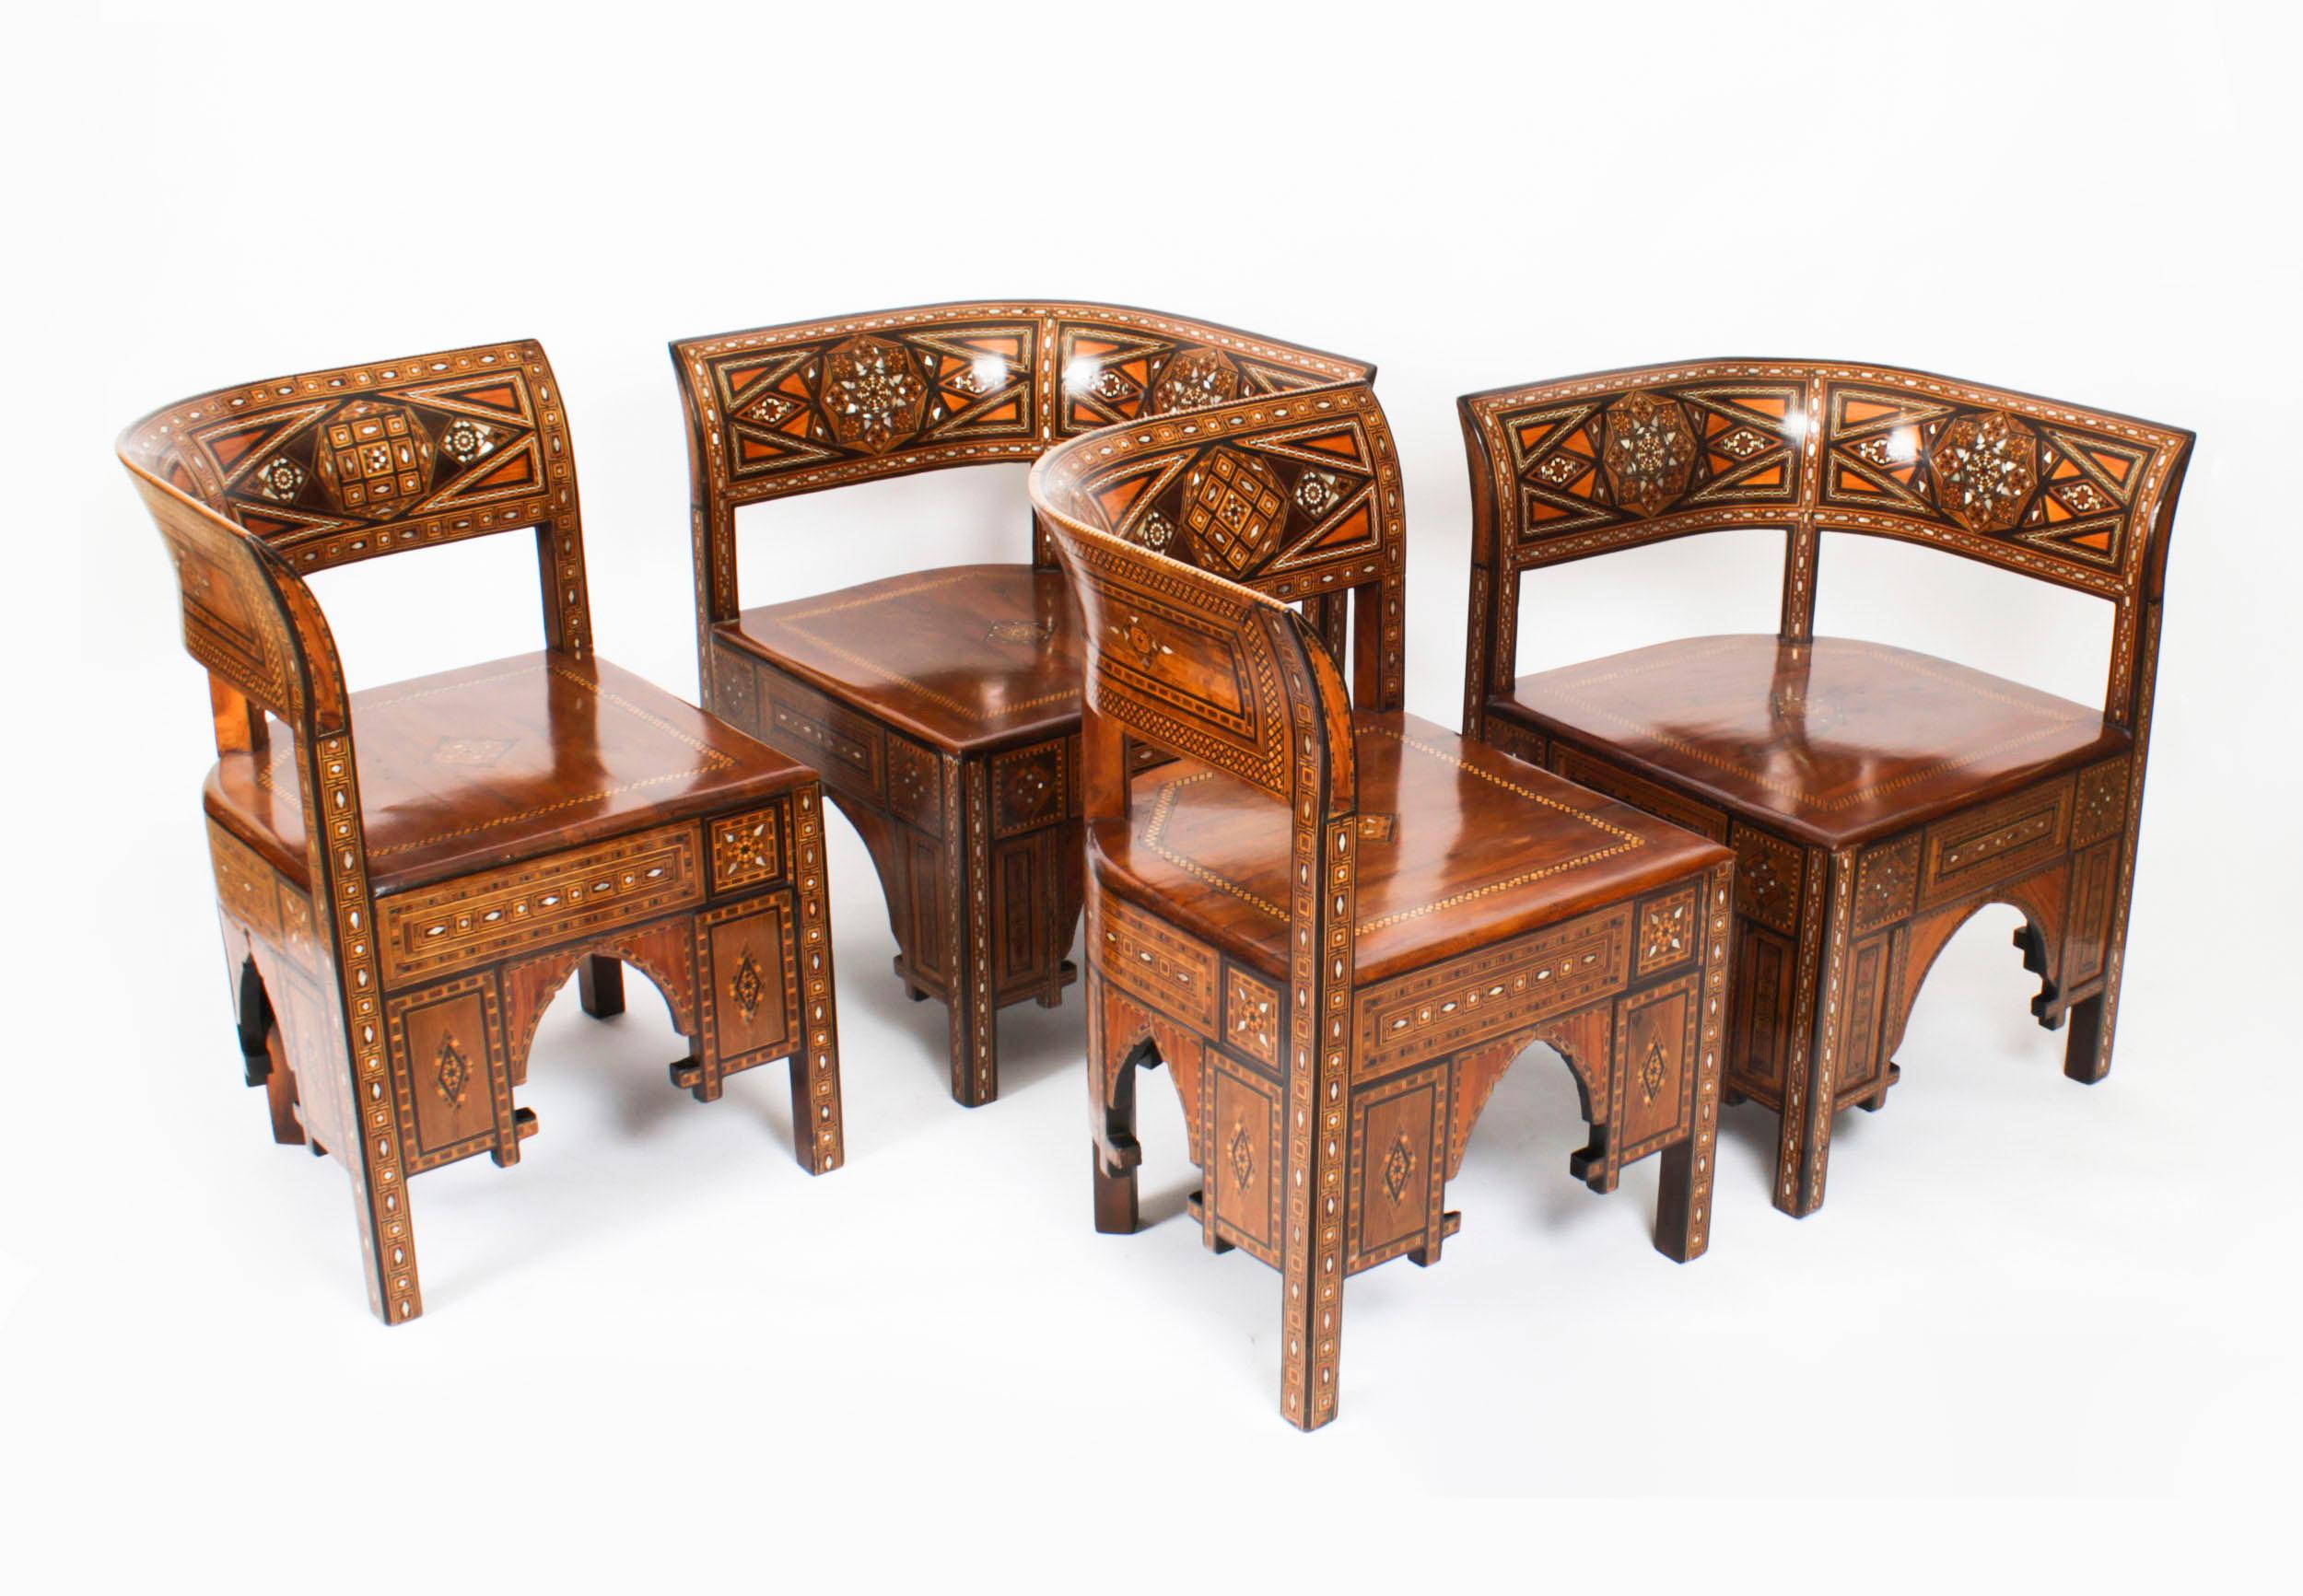 Antique Set of 4 Syrian Parquetry Inlaid Armchairs, Early 20th Century For Sale 16